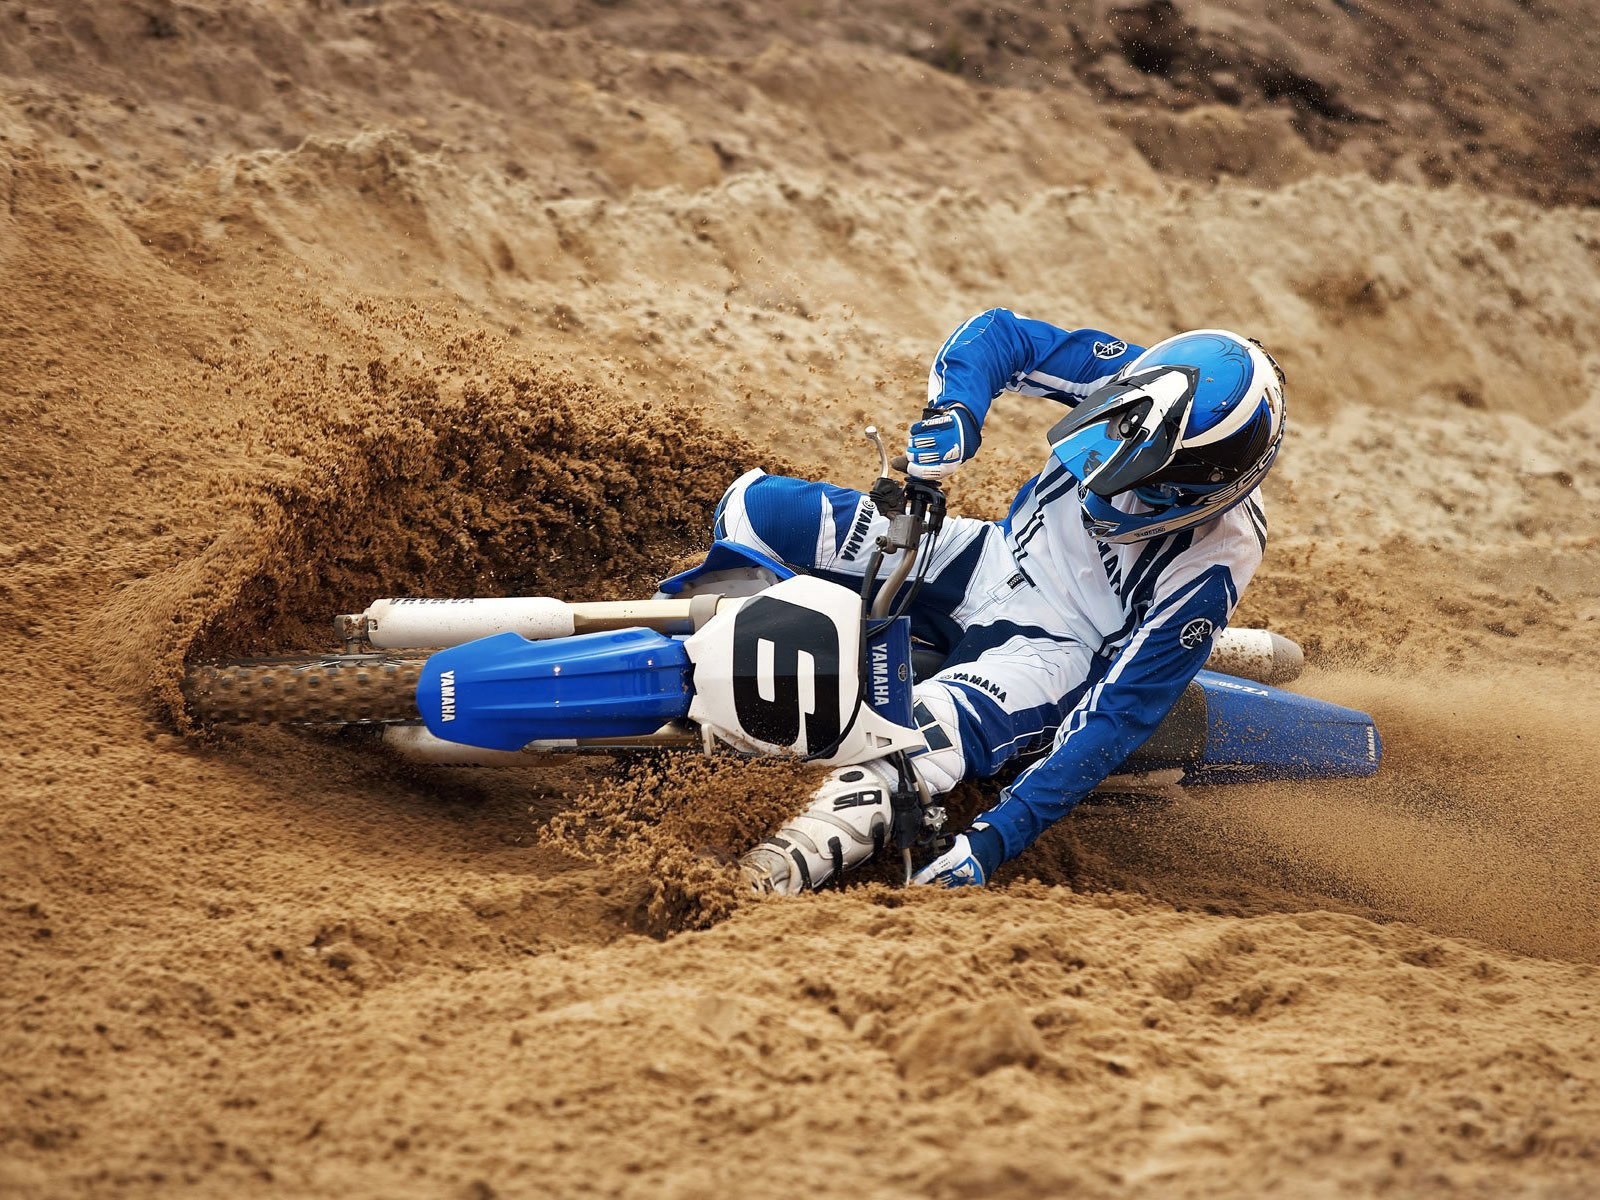 Extreme Moto Race for 1600 x 1200 resolution